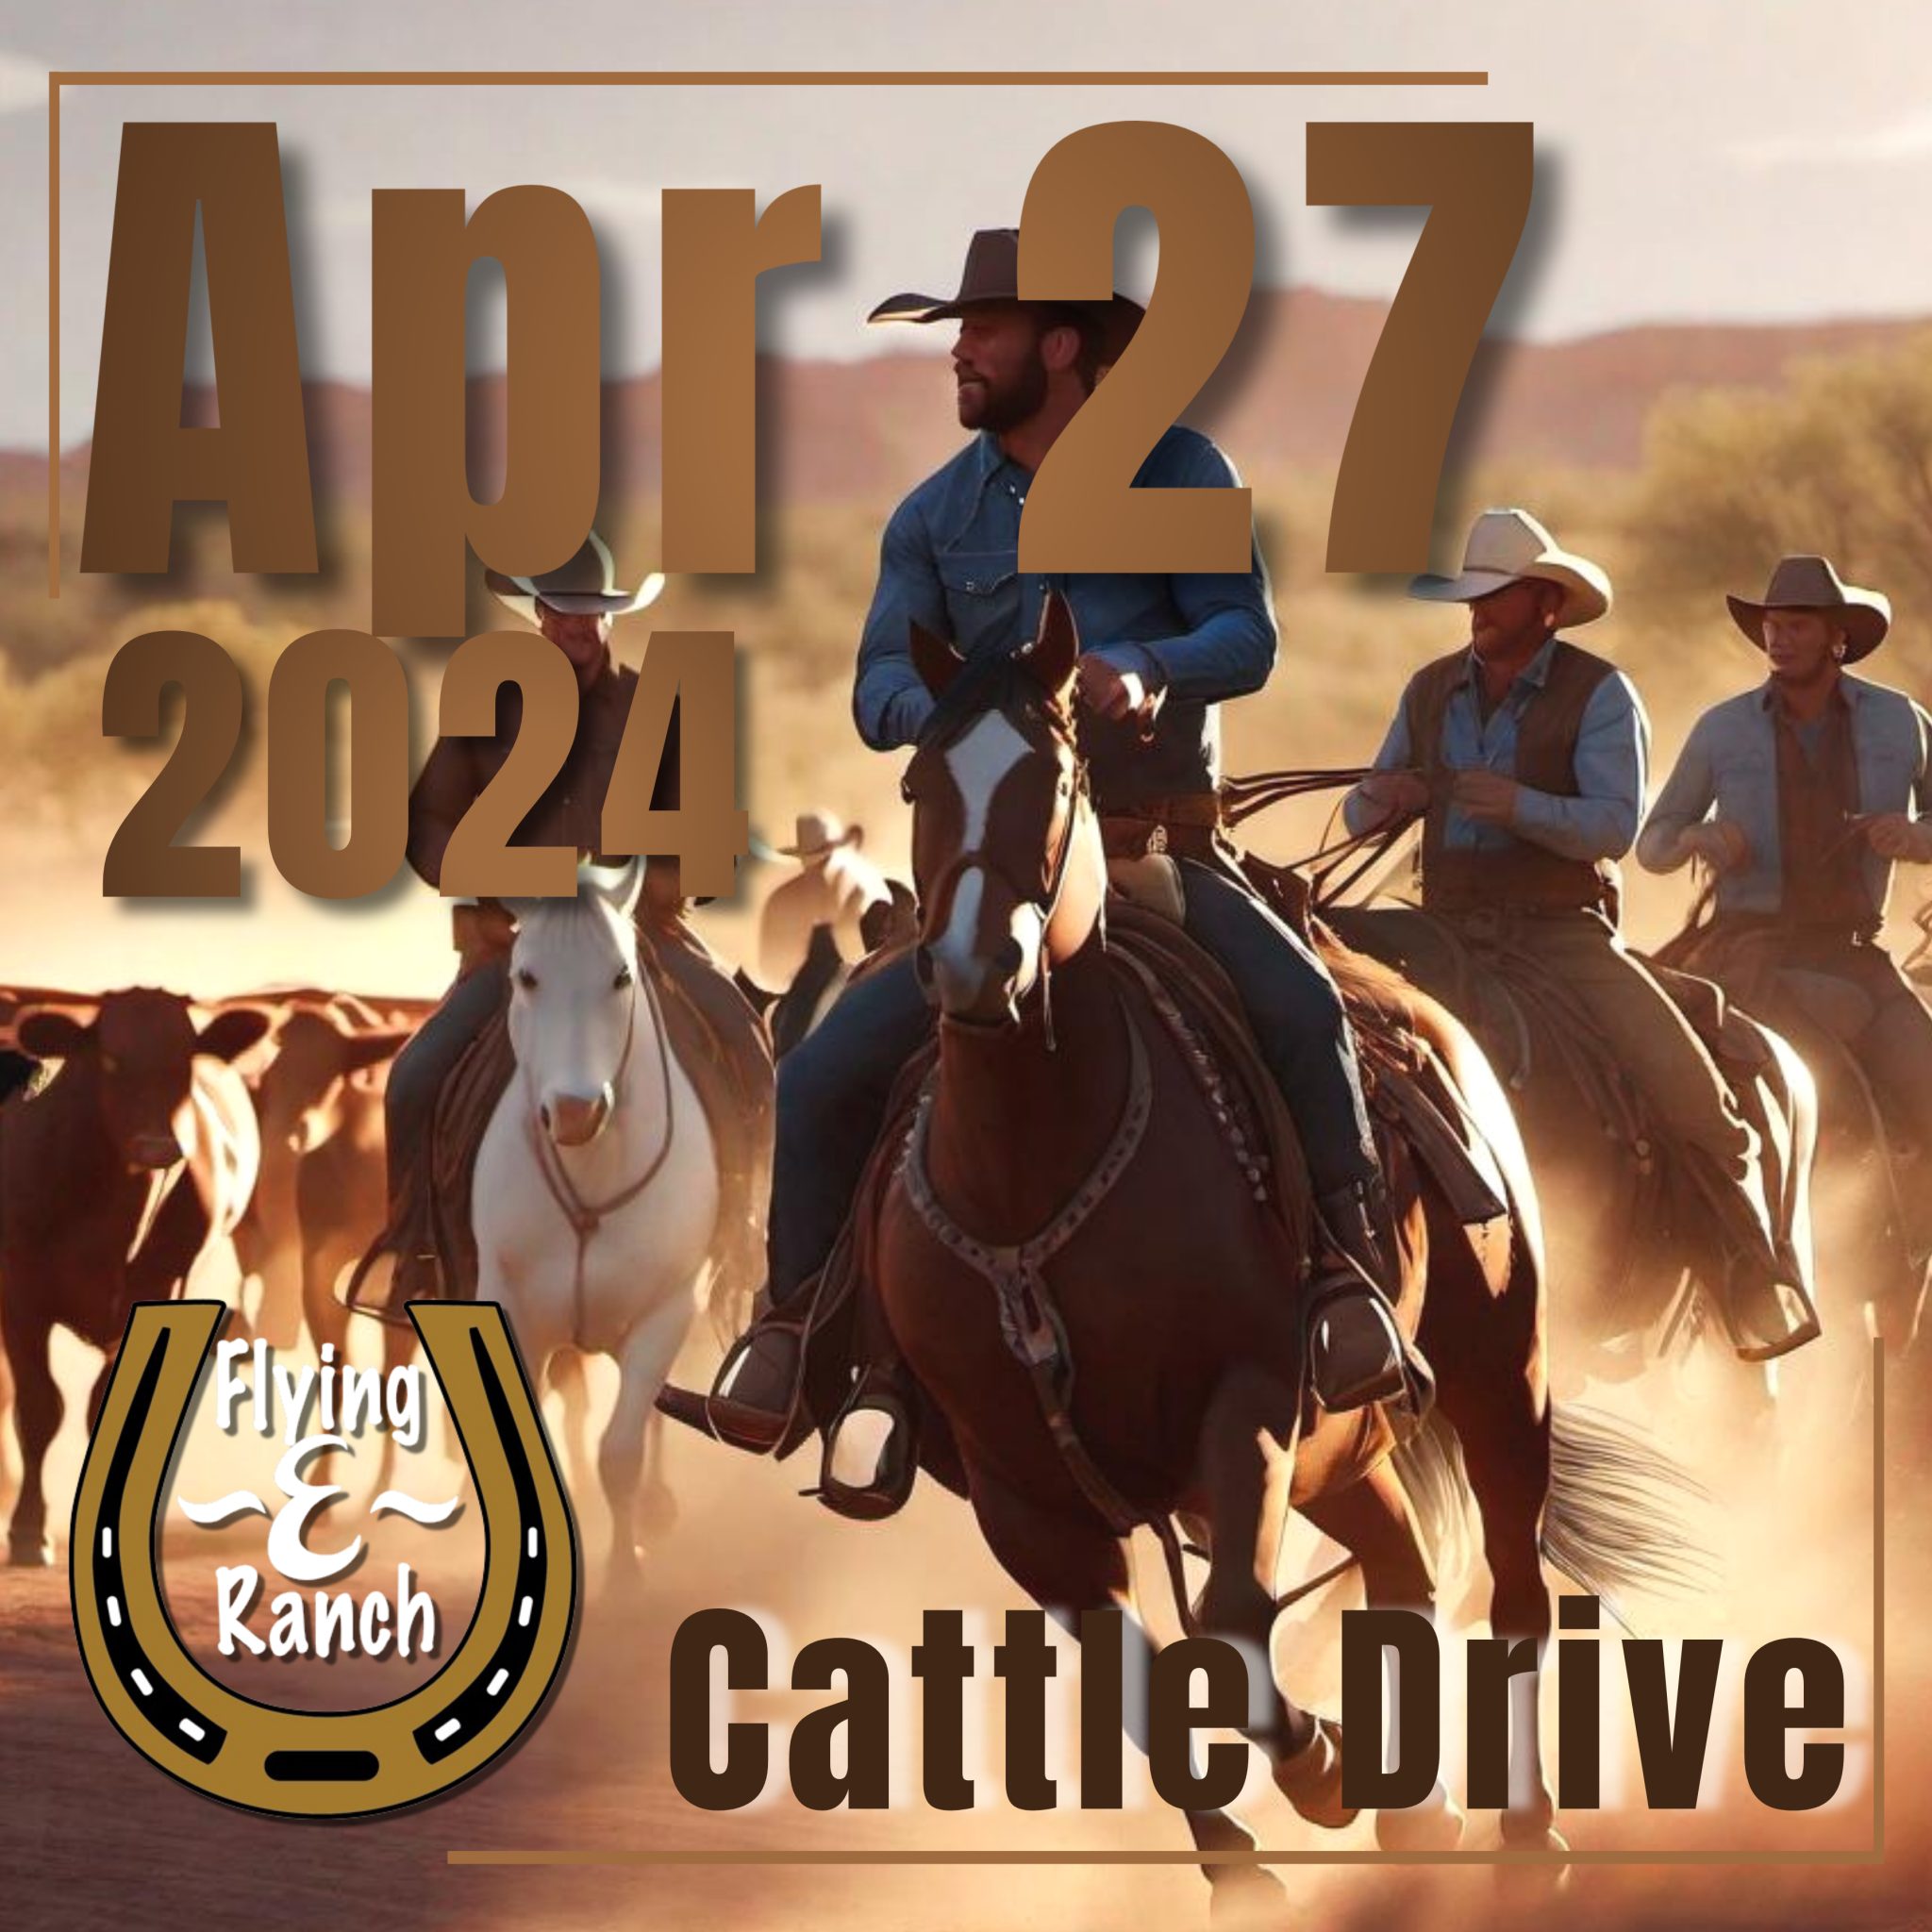 04/27/2024 Cattle Roundup (21+) Flying E Ranch